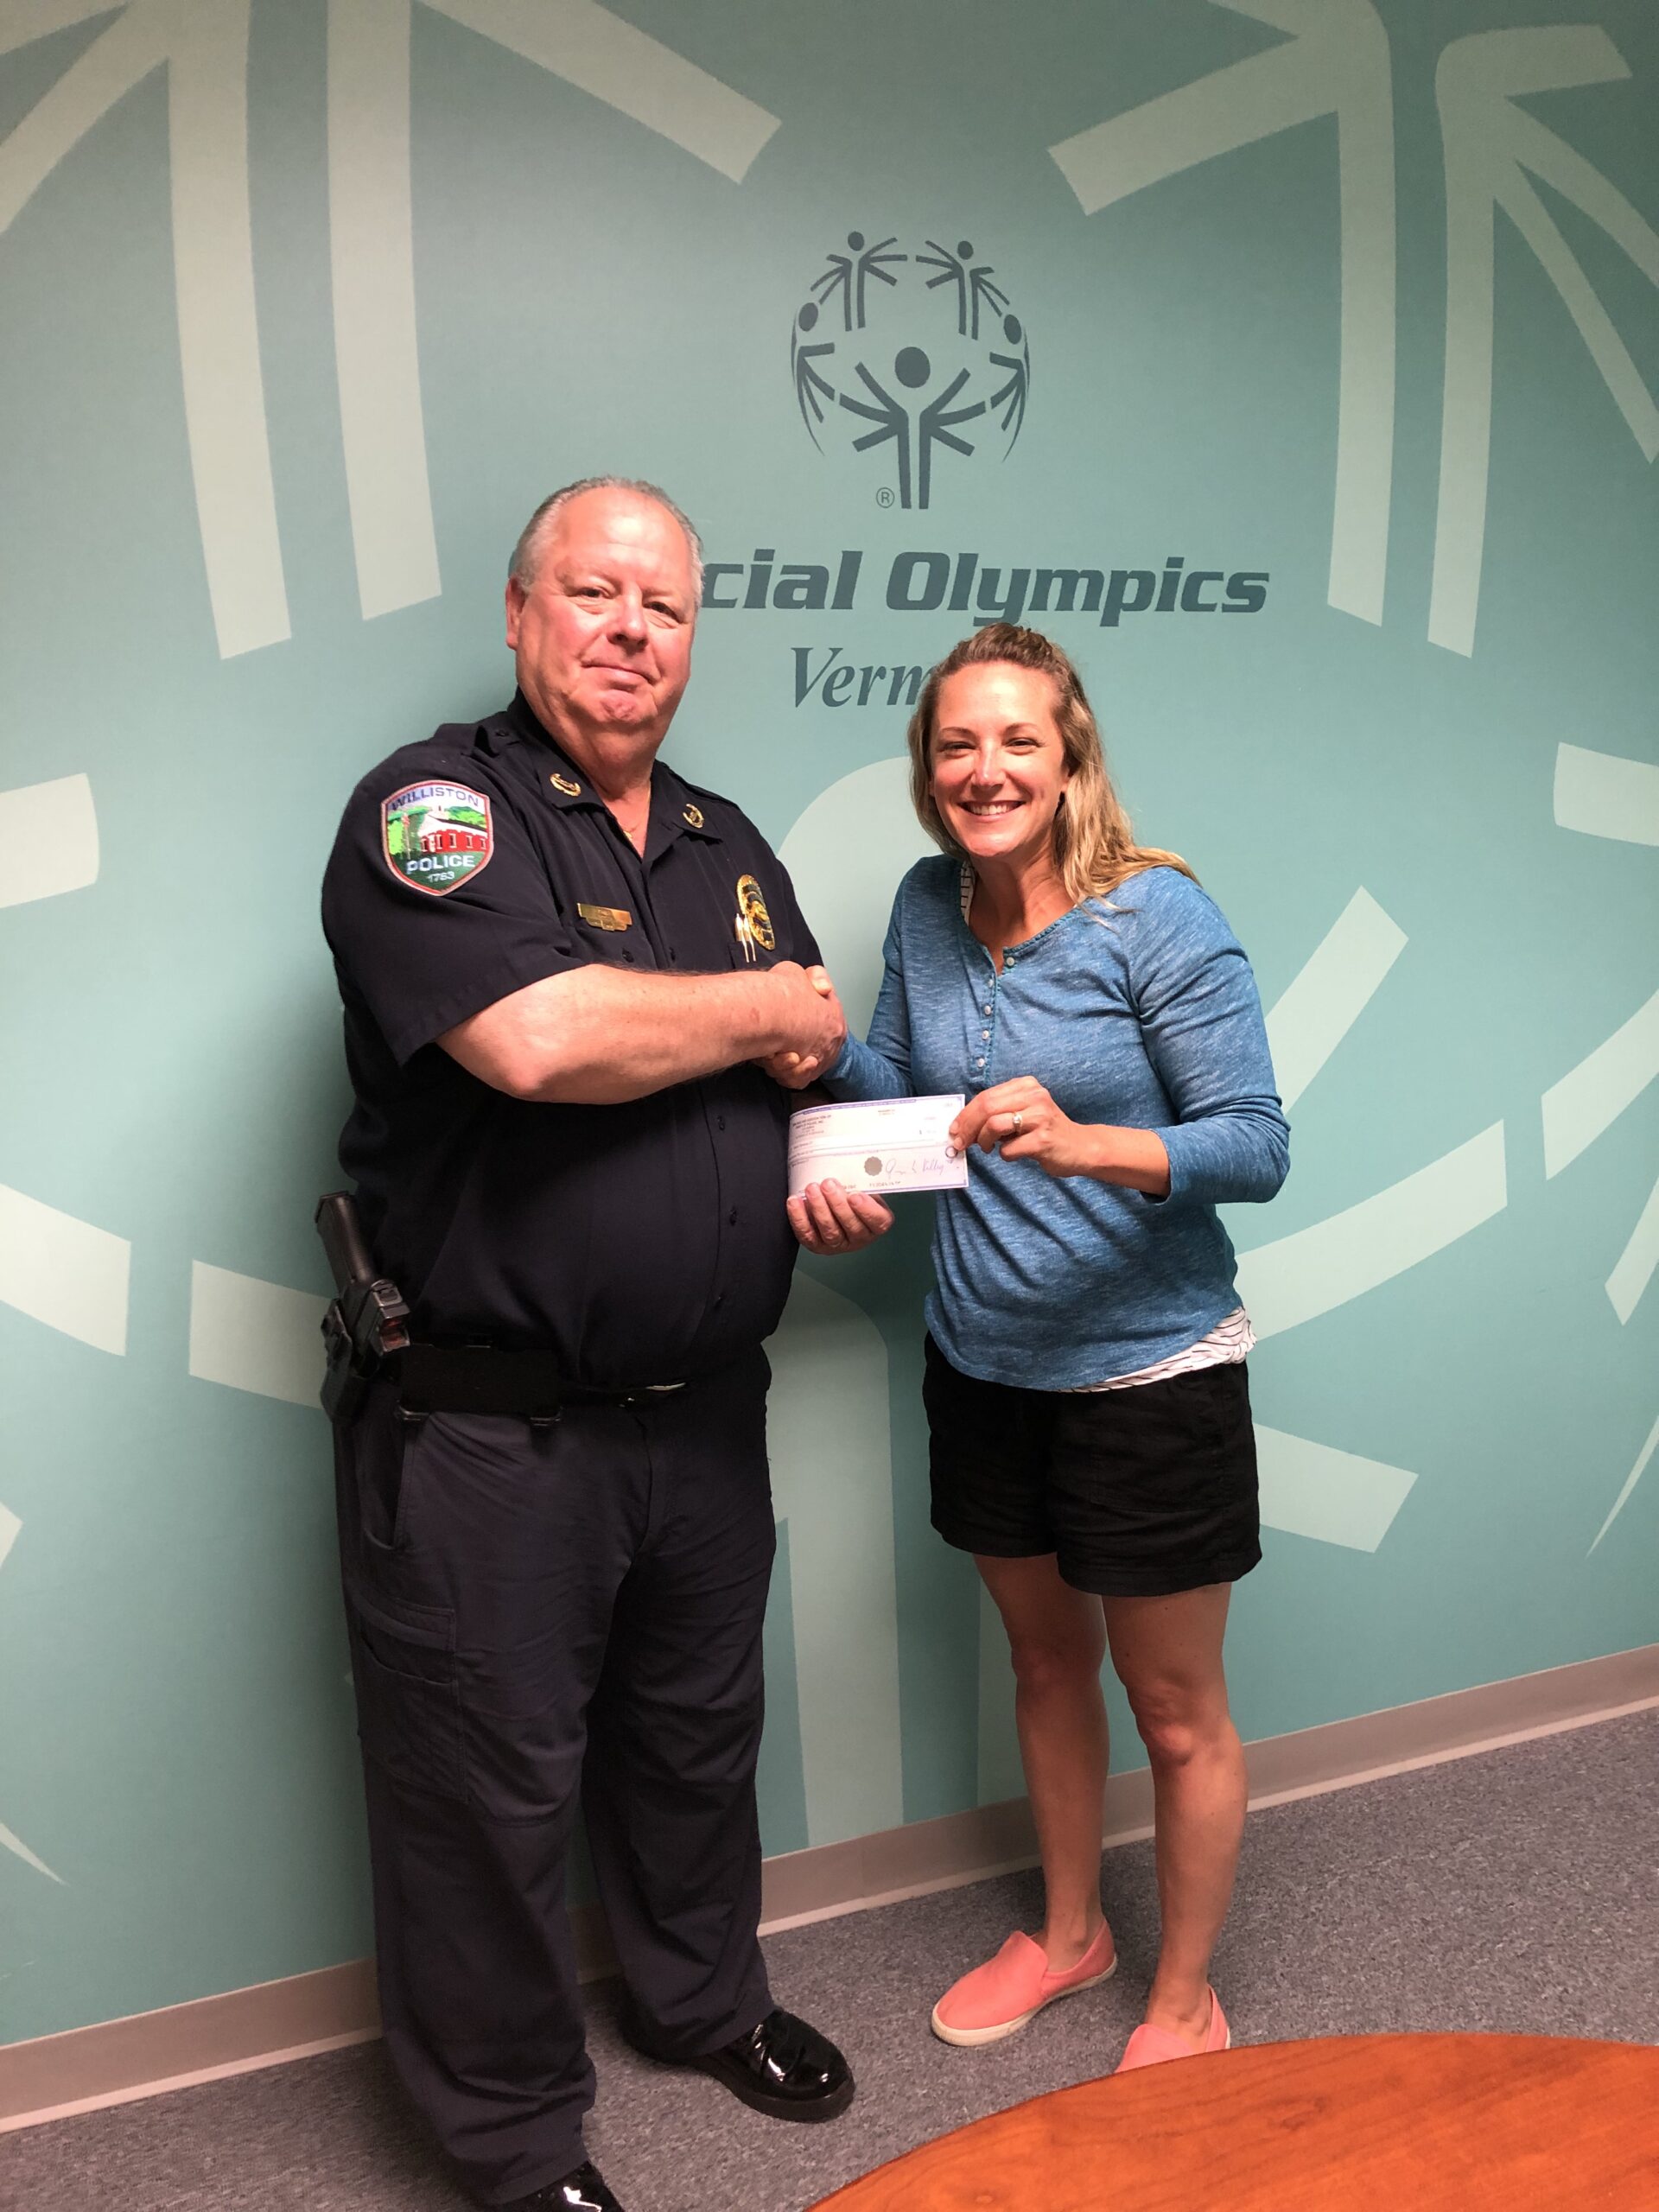 Police chief presenting donation check to woman